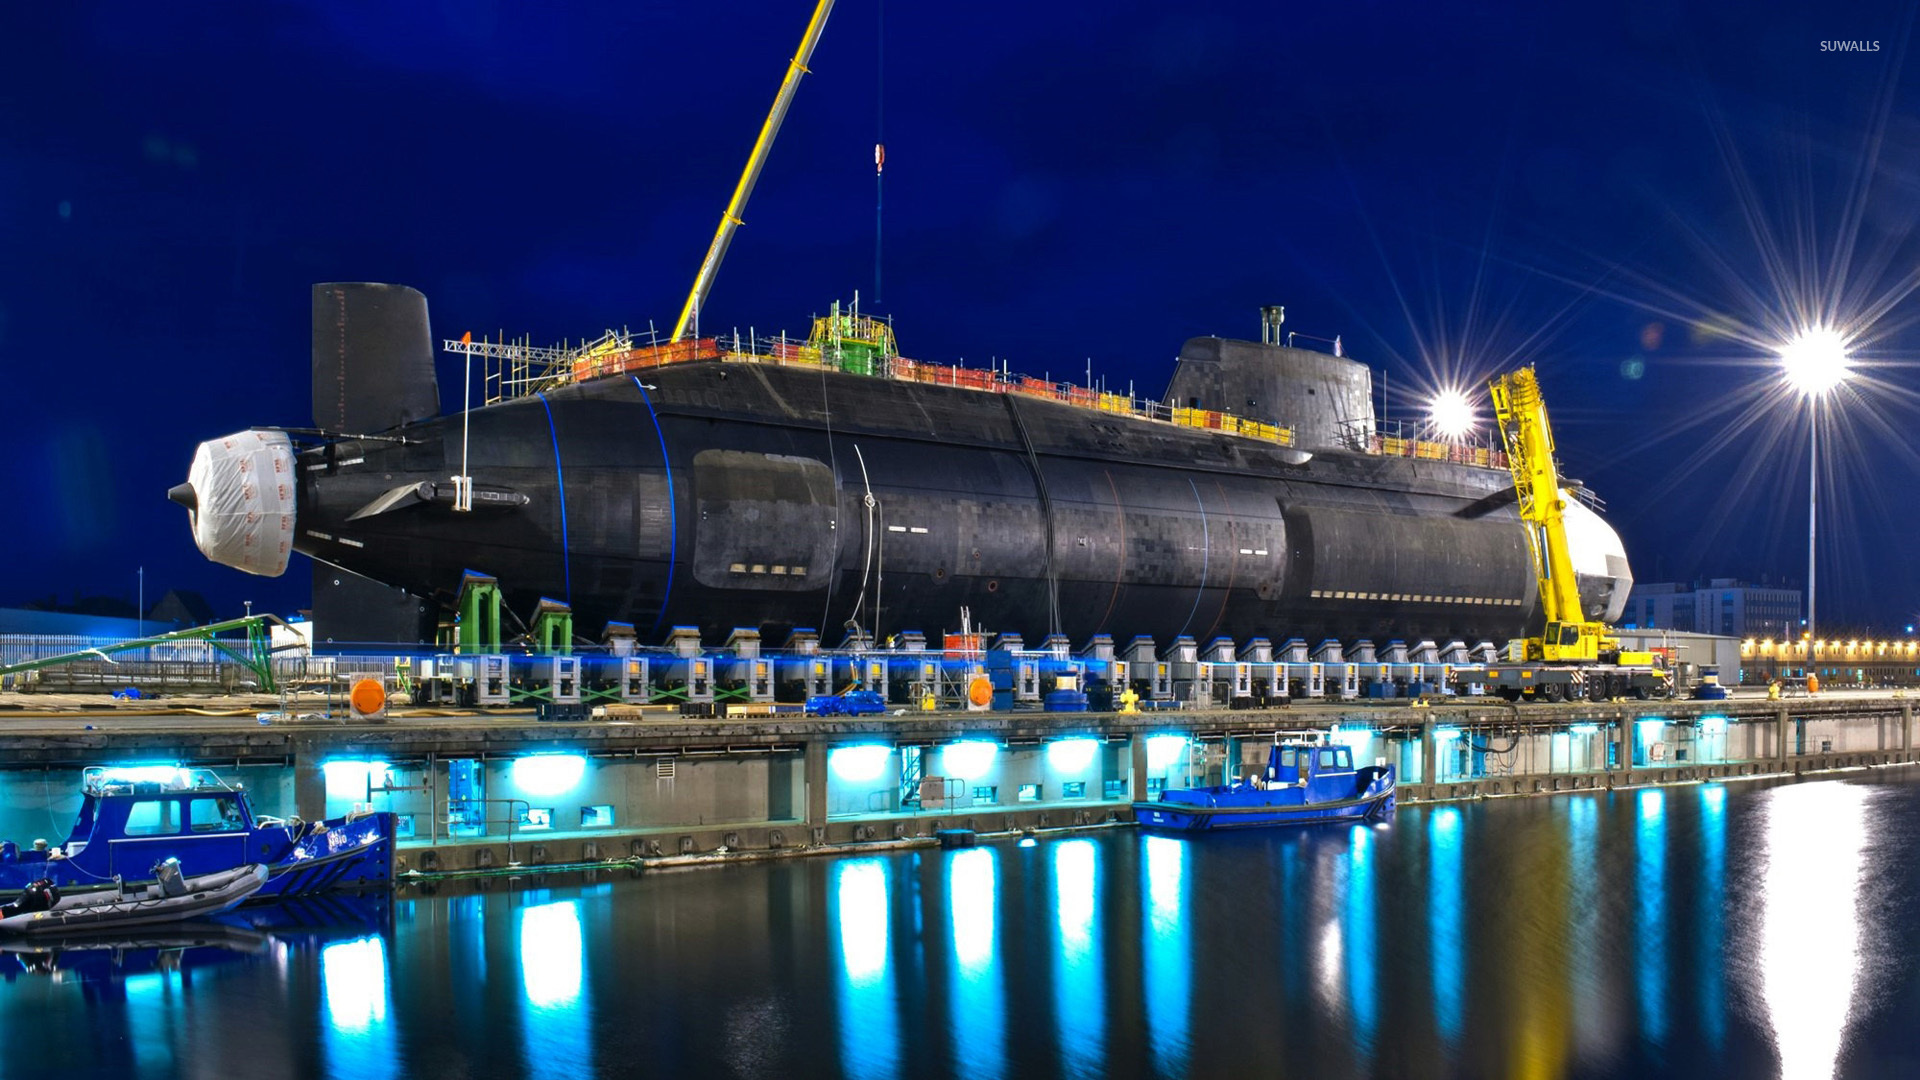 Hms Artful Submarine In A Harbor Wallpaper Photography